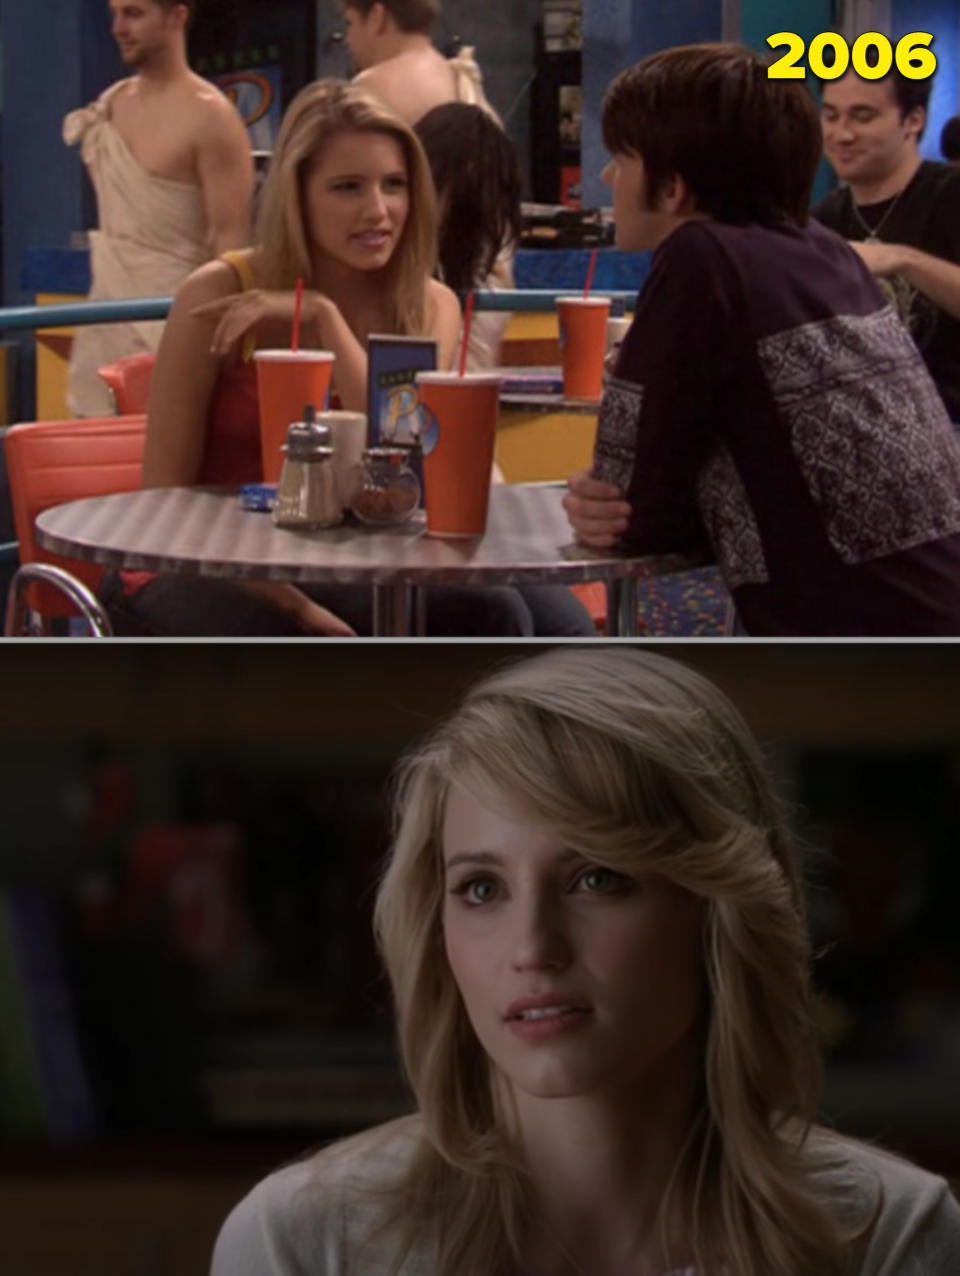 Dianna Agron at the movie theater and in "Glee"